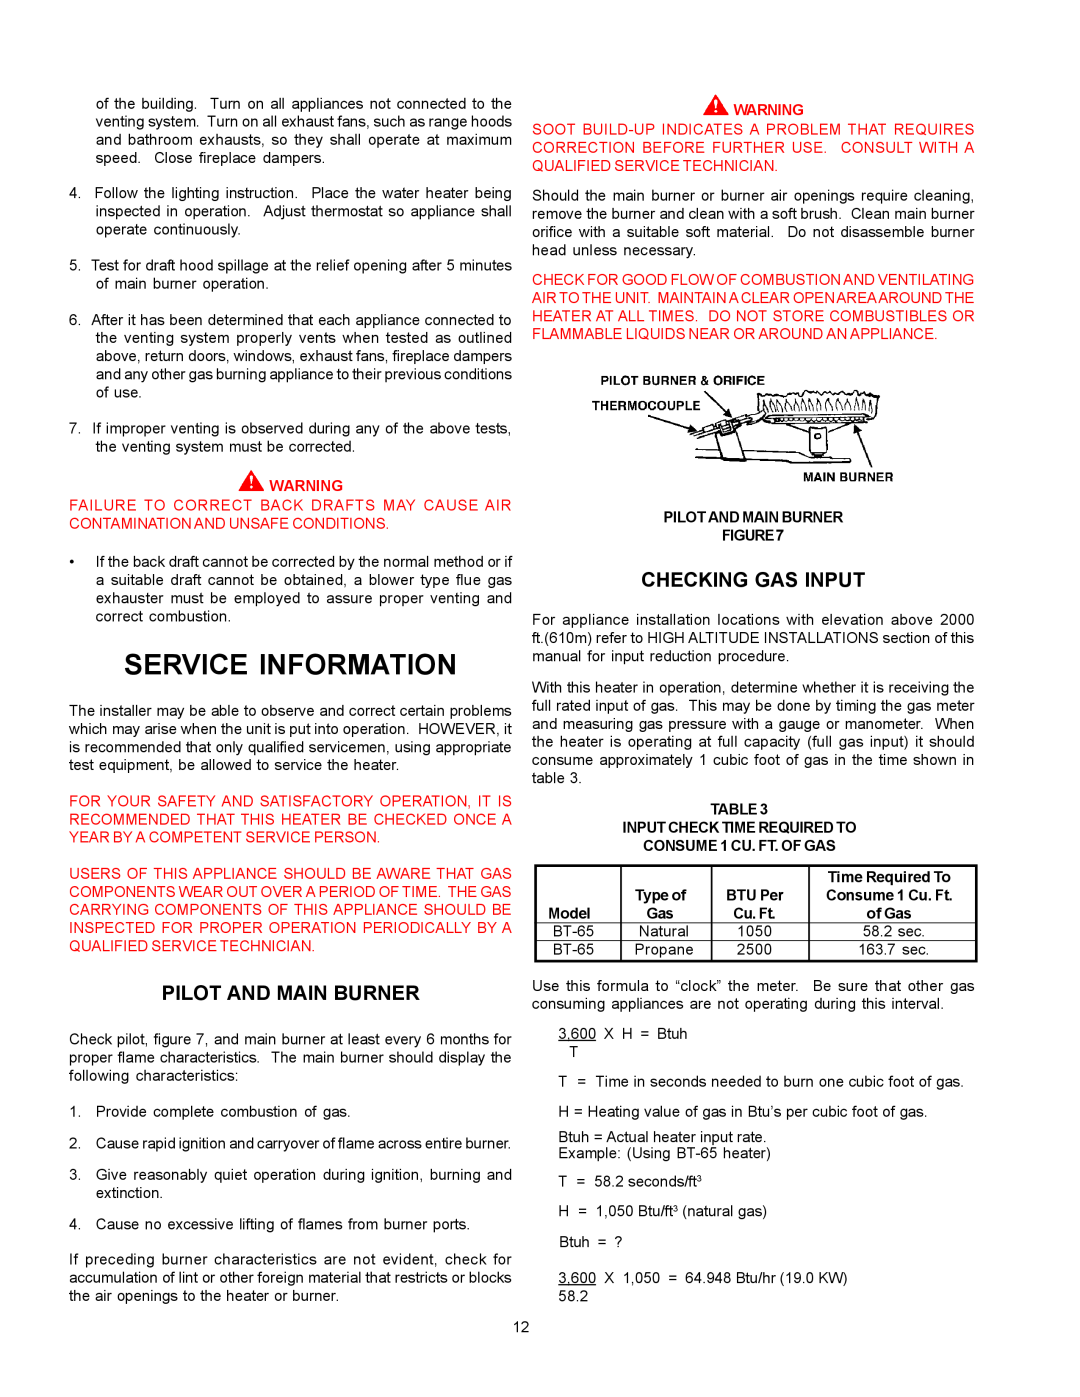 A.O. Smith BT- 65 Service Information, Pilot And Main Burner, Checking Gas Input, Time Required To, BTU Per, Type of 